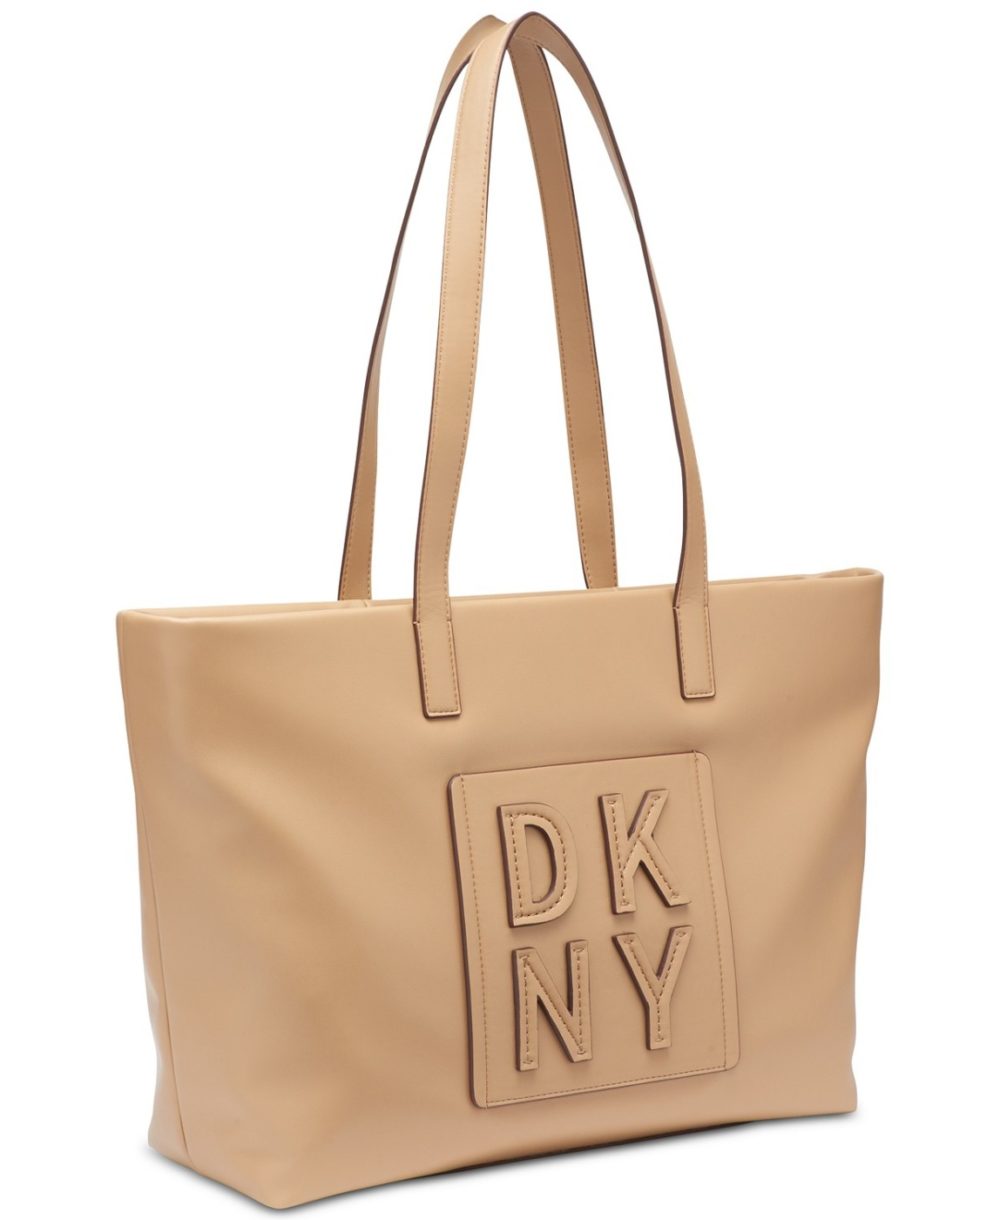 woocommerce-673321-2209615.cloudwaysapps.com-dkny-beige-tilly-stacked-logo-top-zip-tote-bag